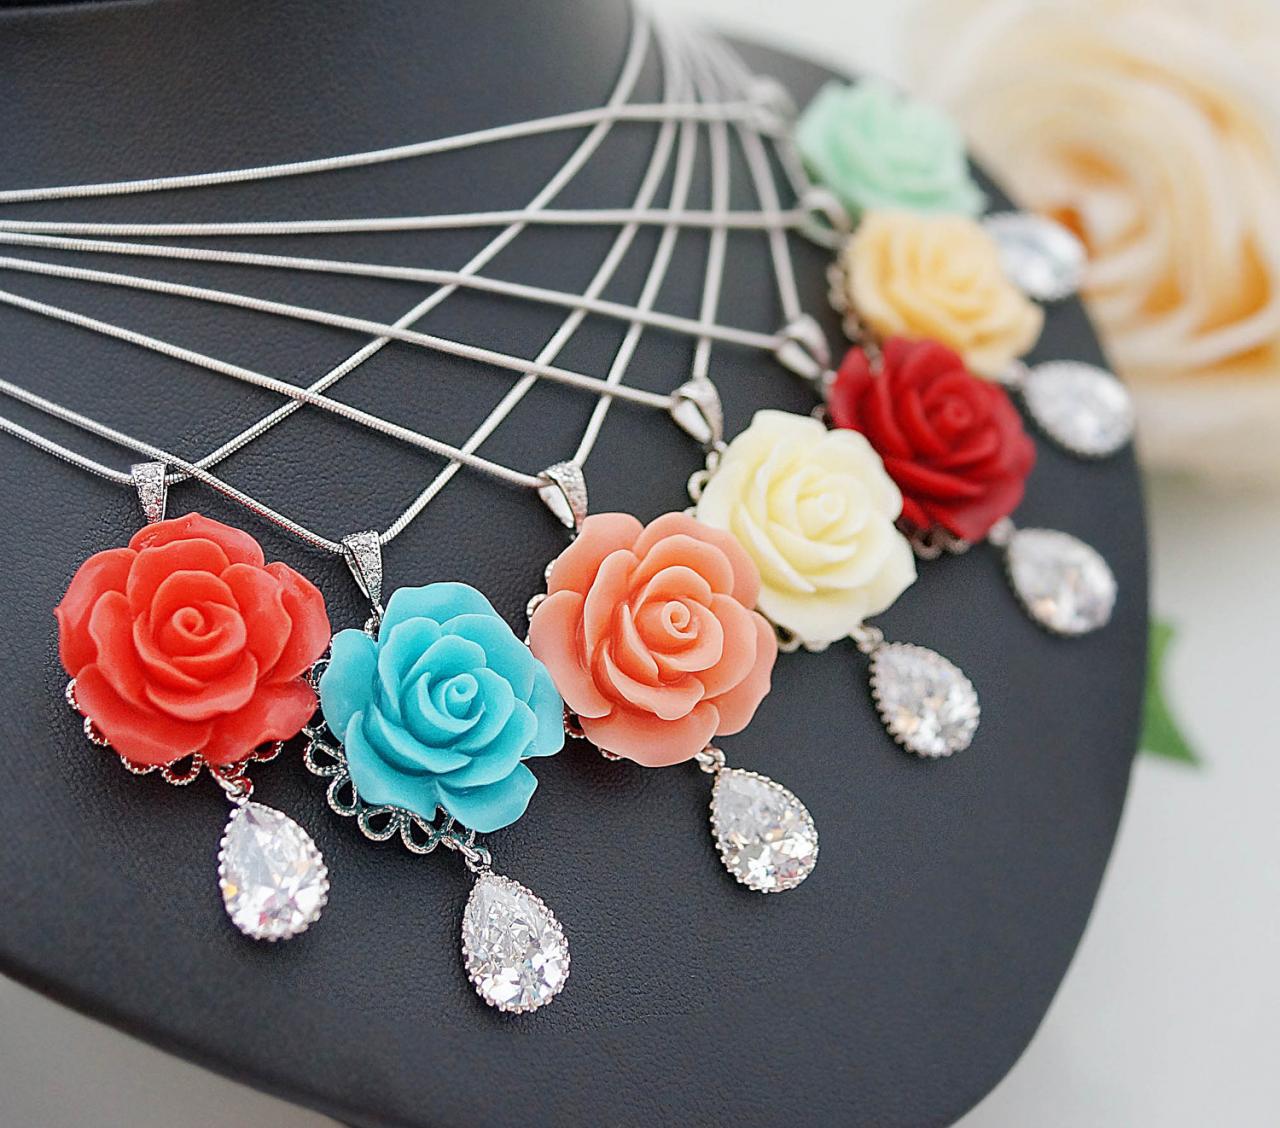 Wedding Jewelry Bridesmaid Gifts Bridesmaid Jewelry Bridesmaid Necklace Rose Flower Cabochon With Cz Tear Drop Necklace Christmas Gift